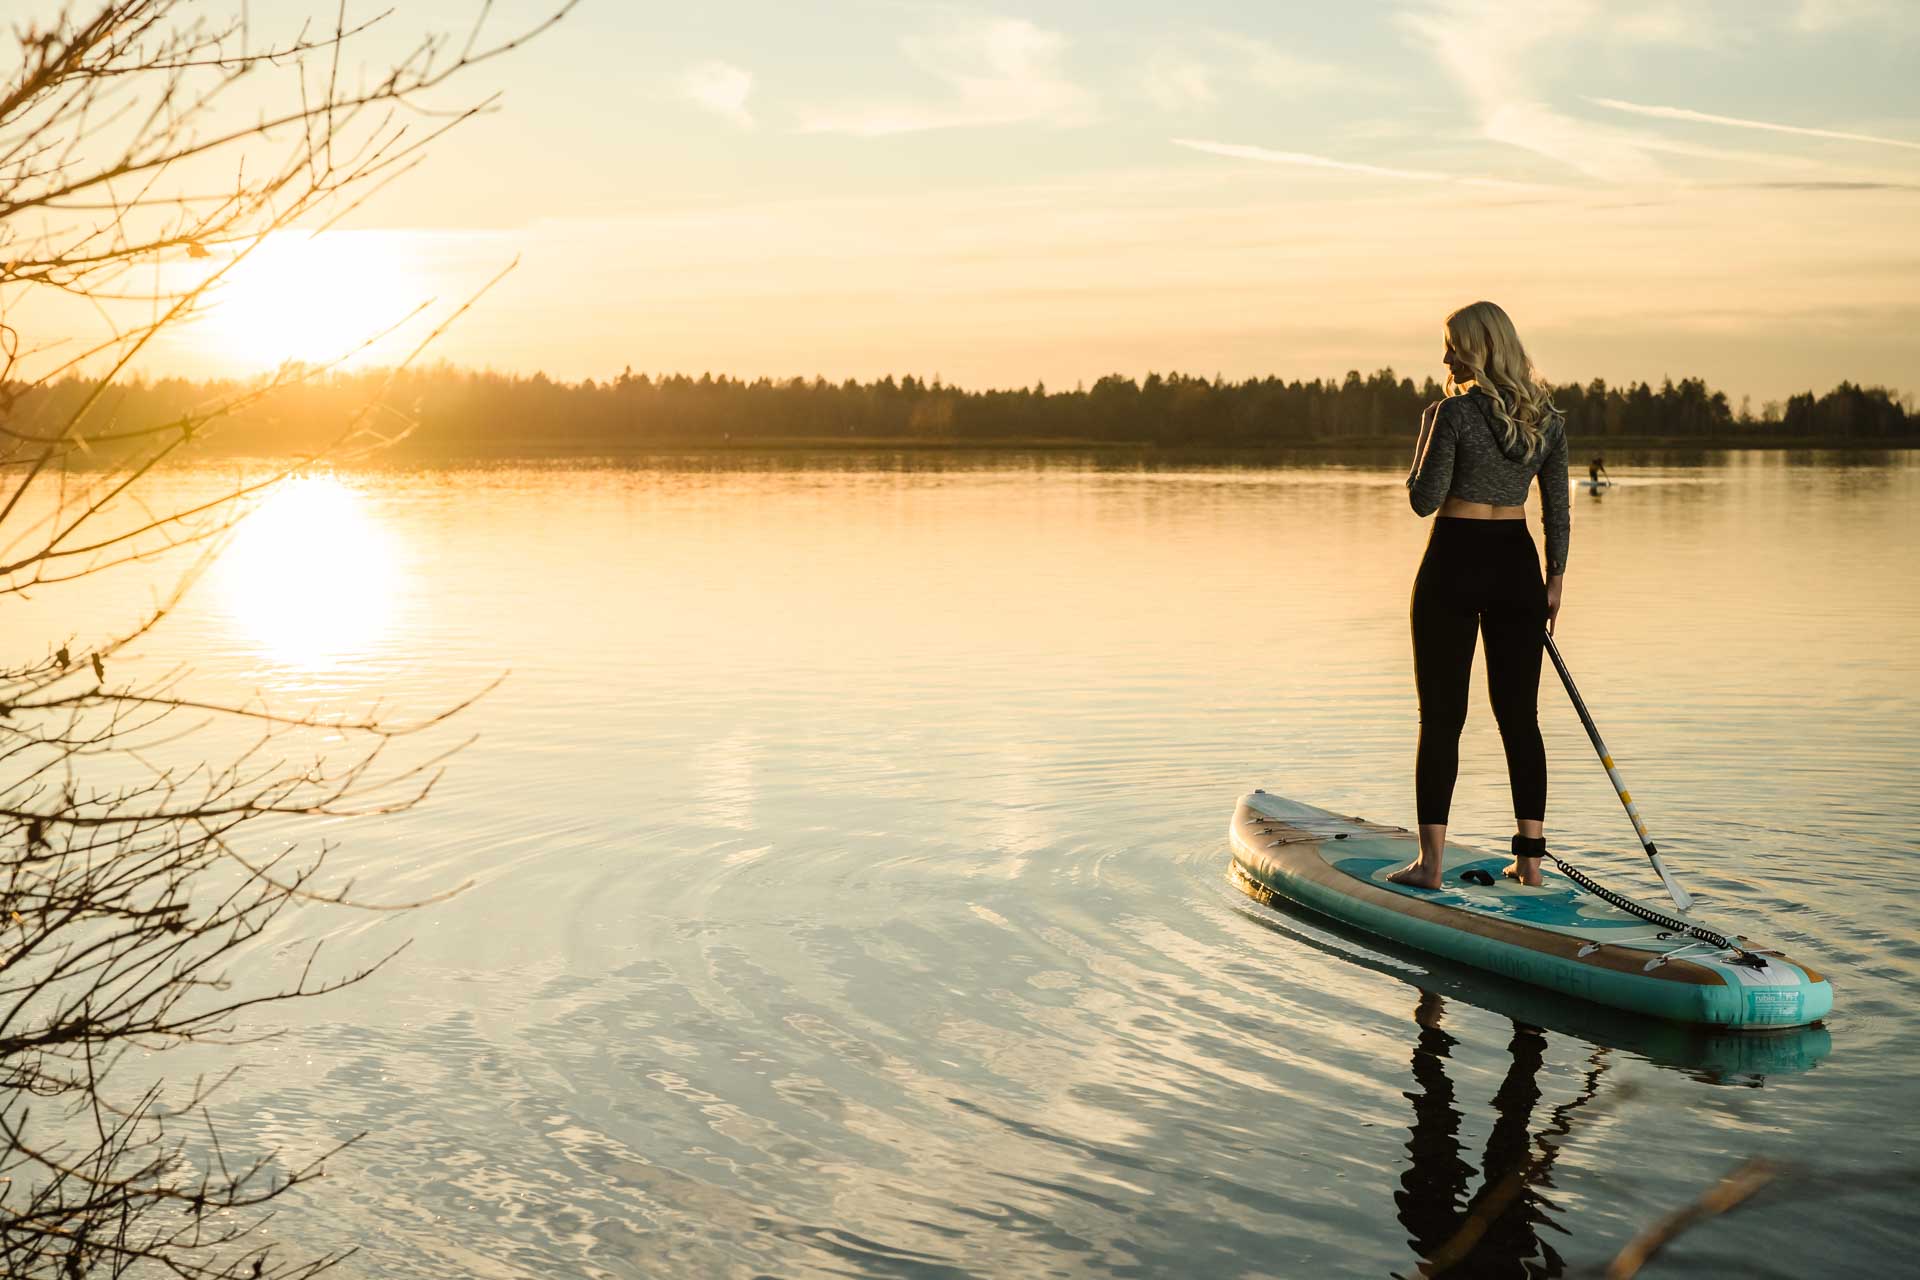 SUP (Stand Up Paddling) in Bavaria at sunset